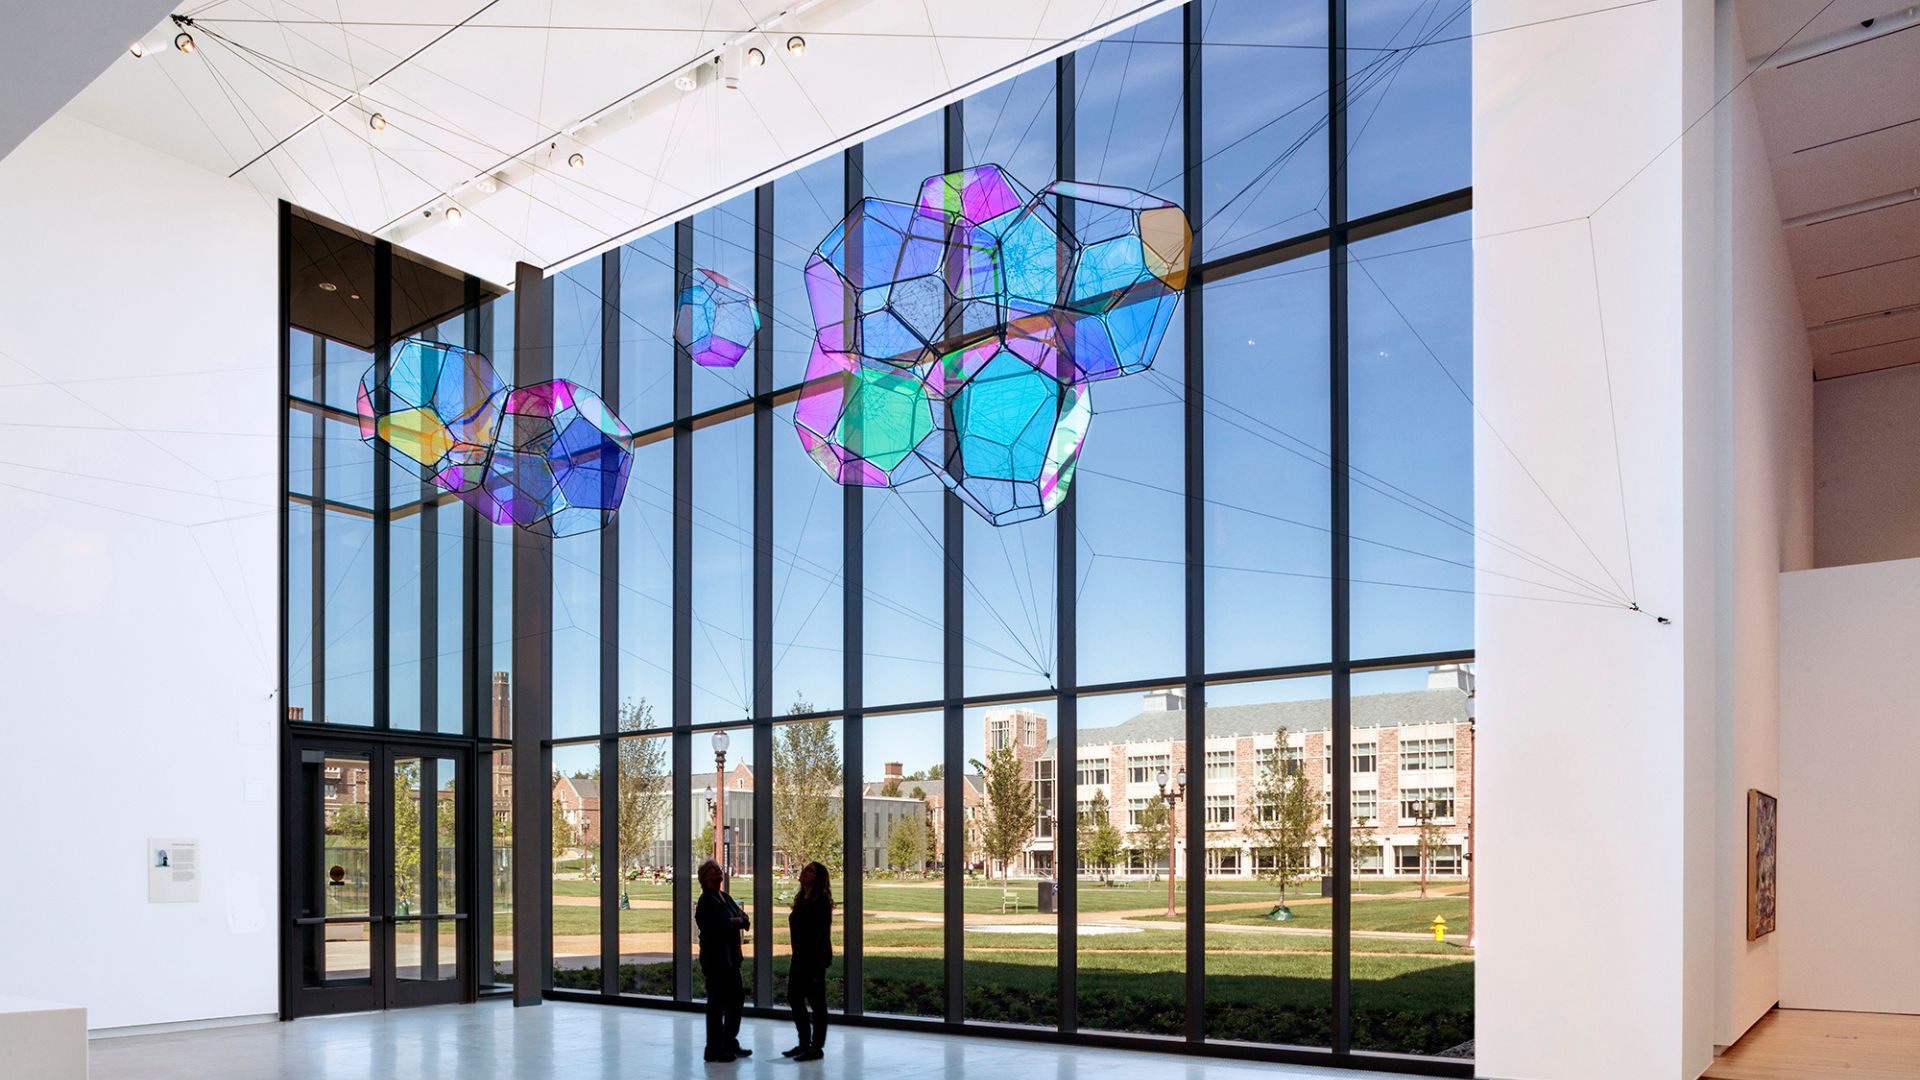 Argentine artist Tomás Saraceno's Cosmic Filaments hangs in the lobby of the Mildred Lane Kemper Art Museum.